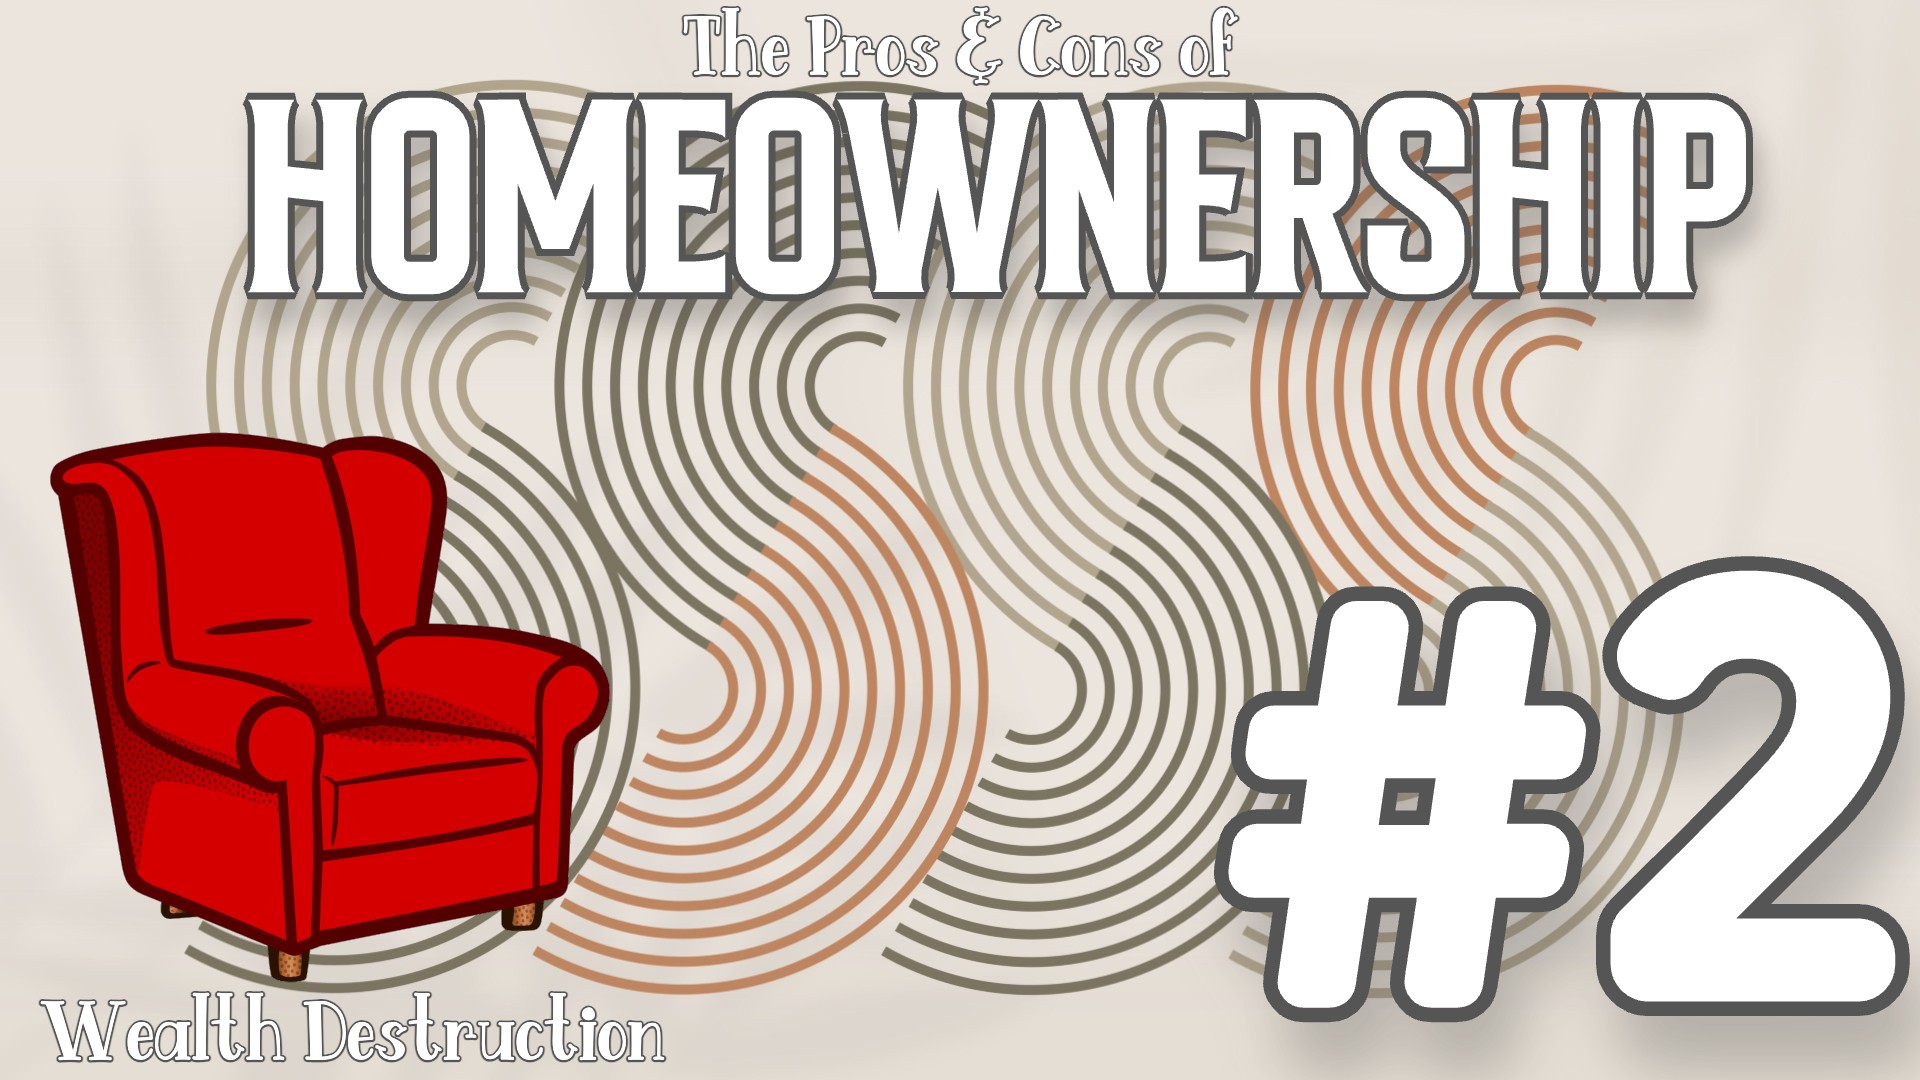 The Pros & Cons of Homeownership 2